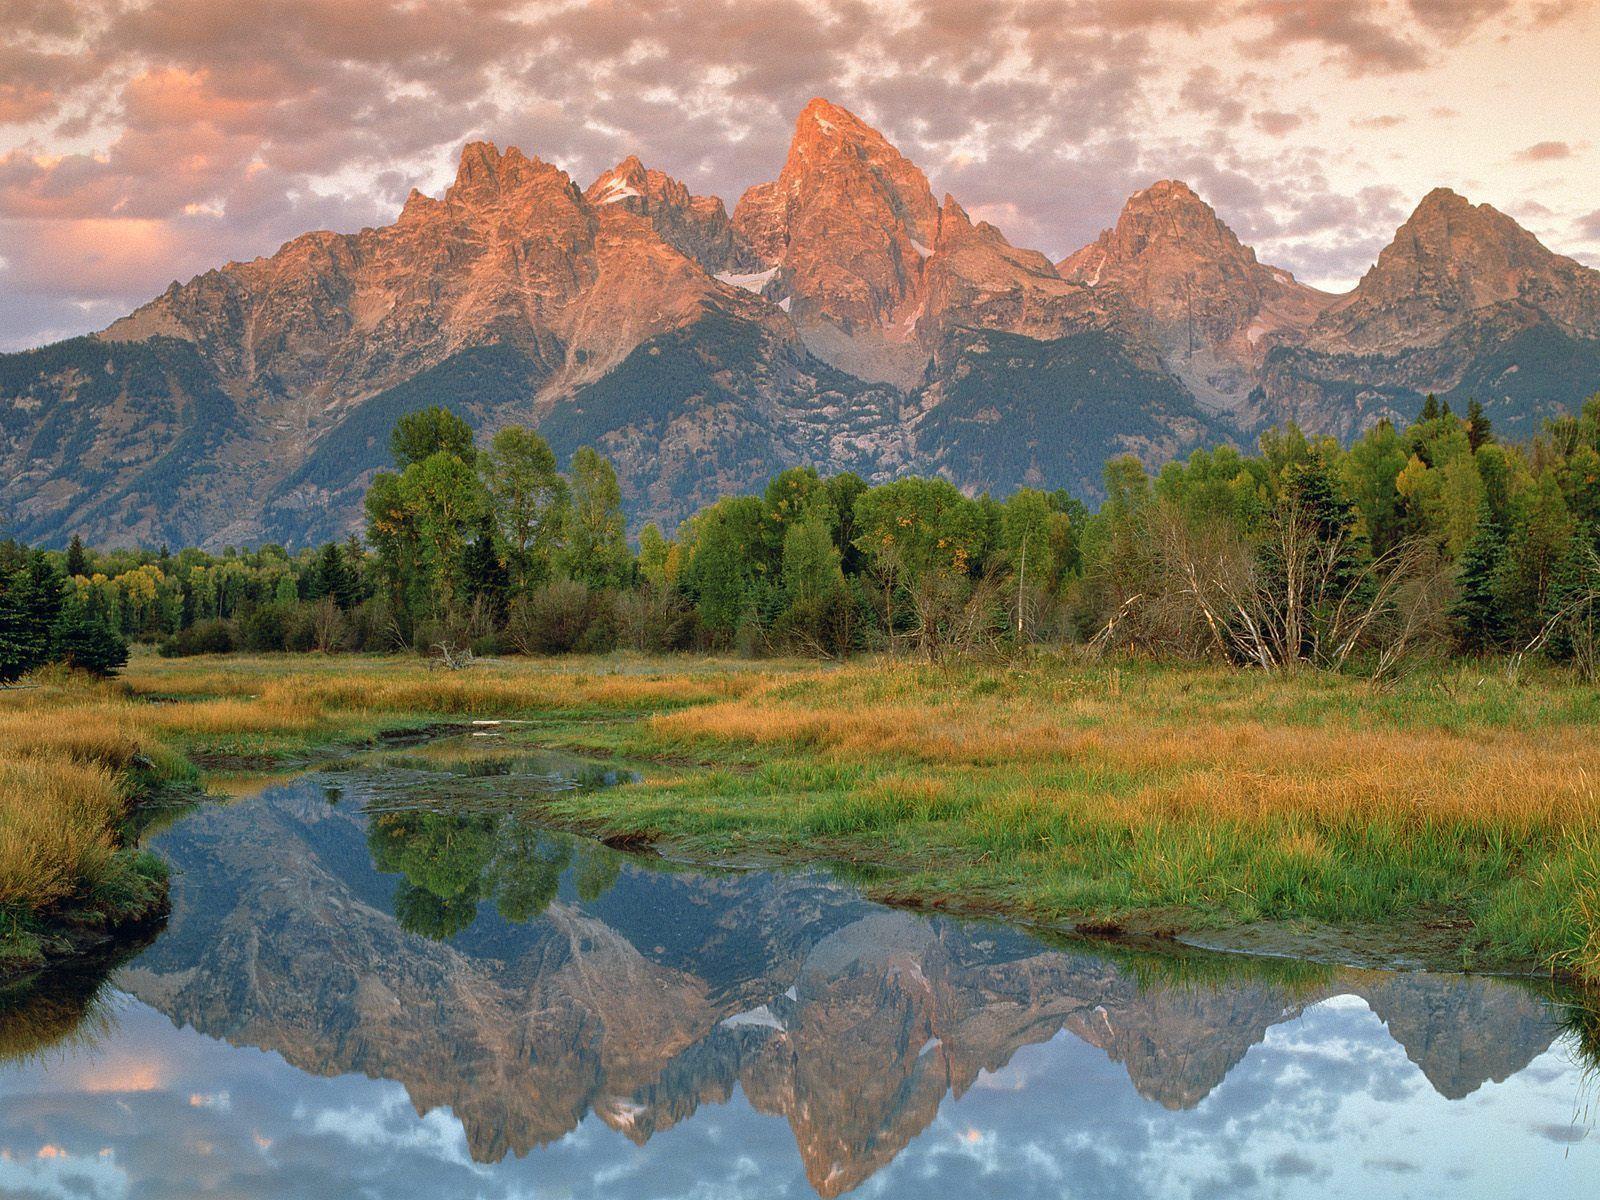 Check this out! our new Grand Teton wallpaper